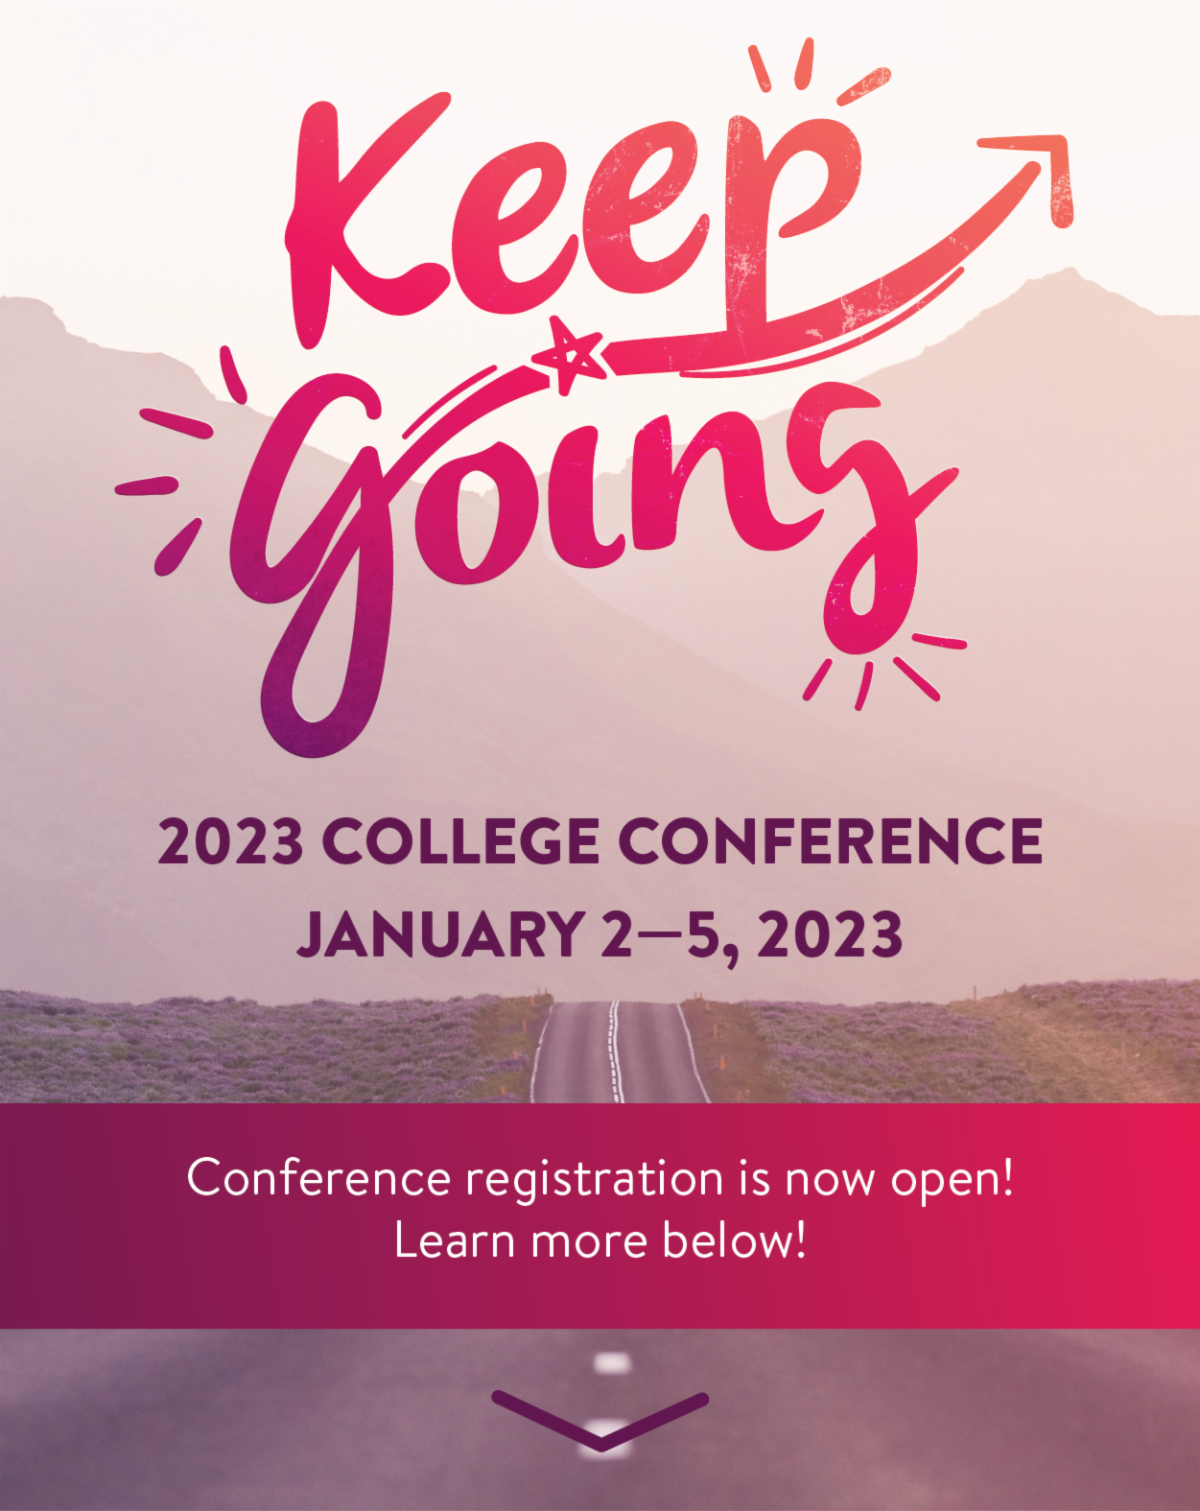 Keep Going! 2023 College Conference at Montreat January 2–5, 2023: Conference Registration is now open! Learn more below!